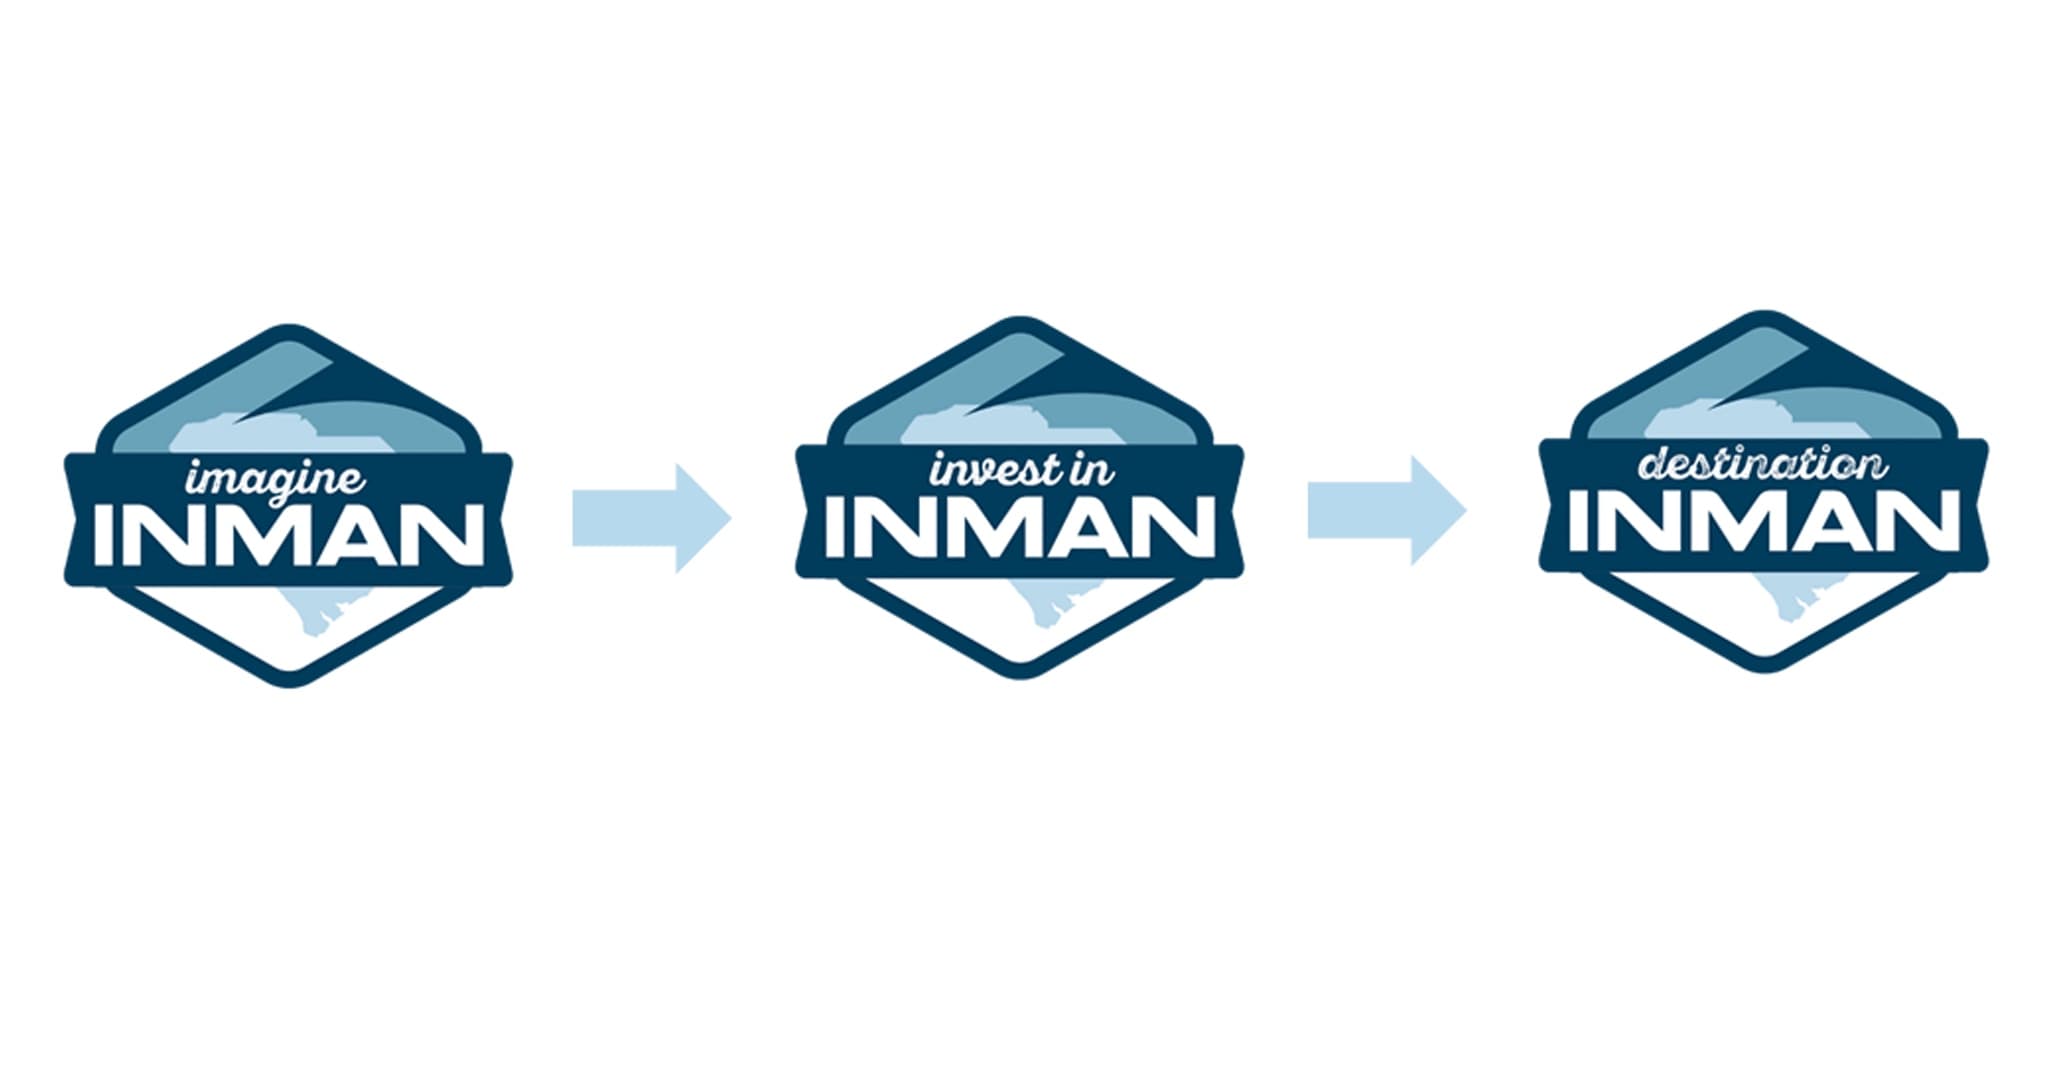 Boudreaux planning department created a symbol for the City of Inman.